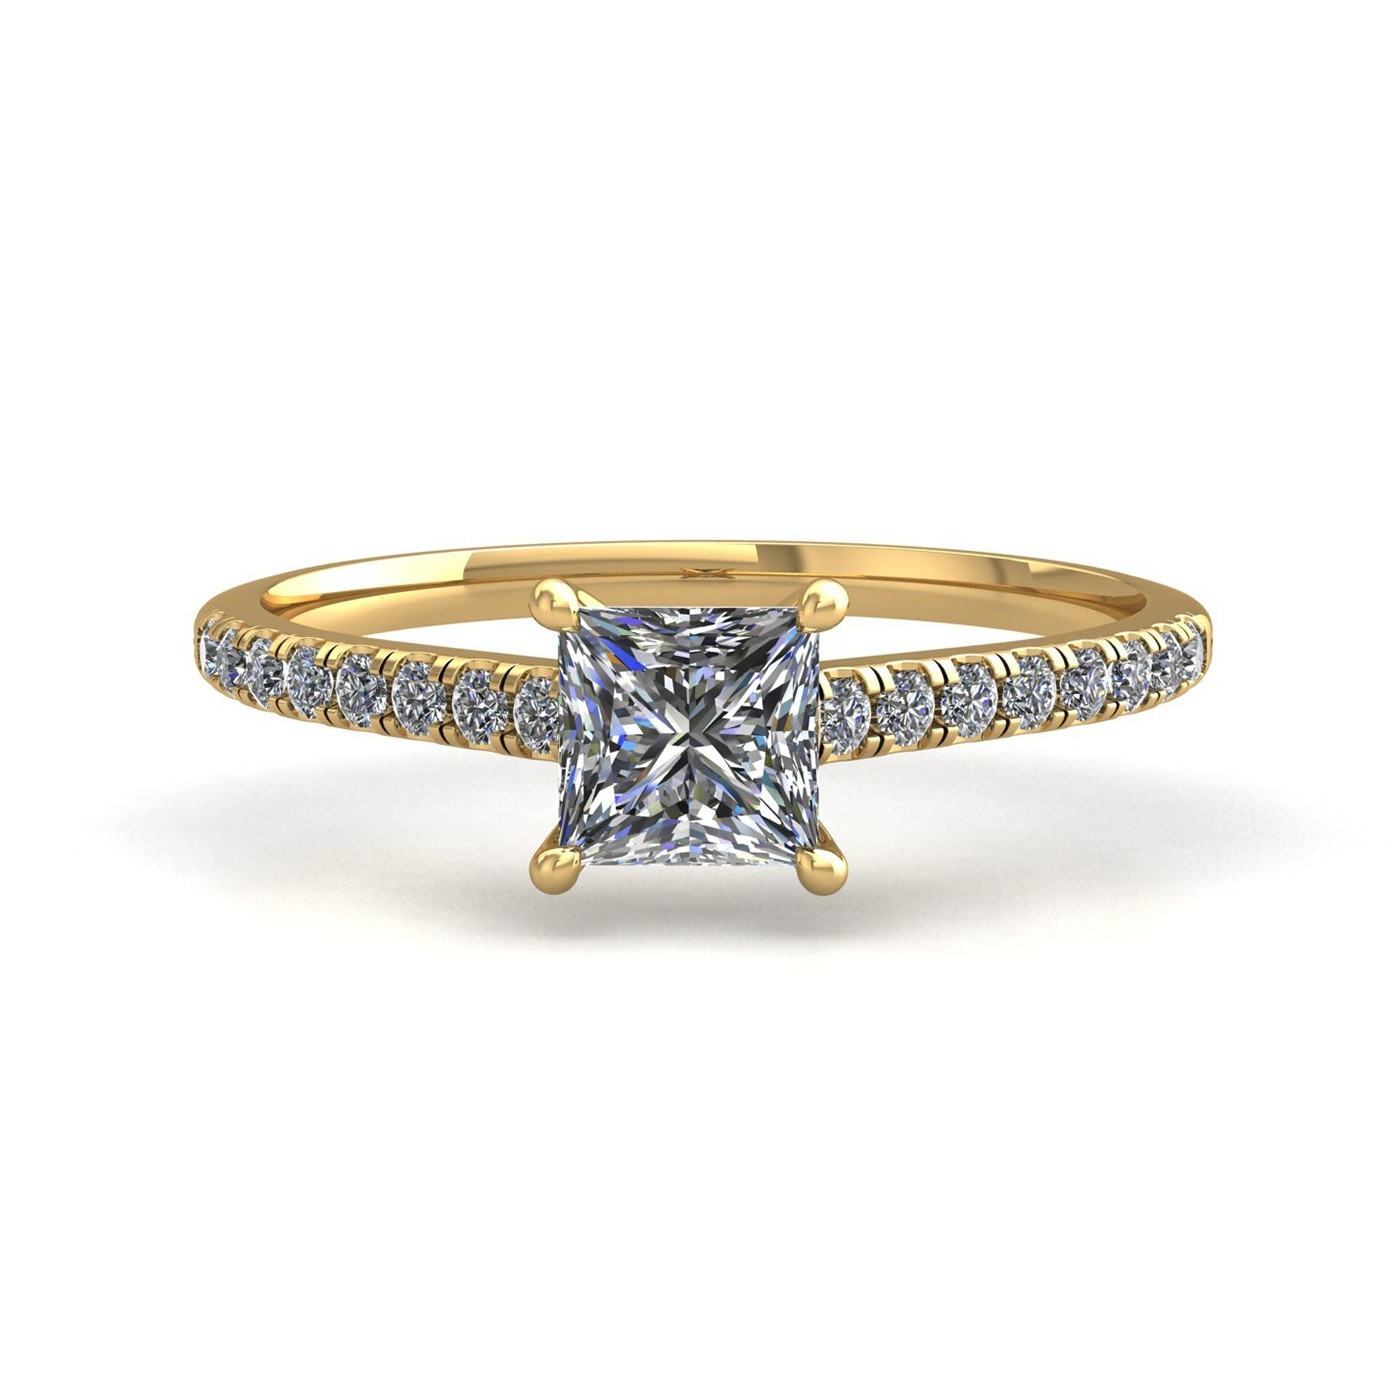 18k yellow gold  1,20 ct 4 prongs princess cut diamond engagement ring with whisper thin pavÉ set band Photos & images